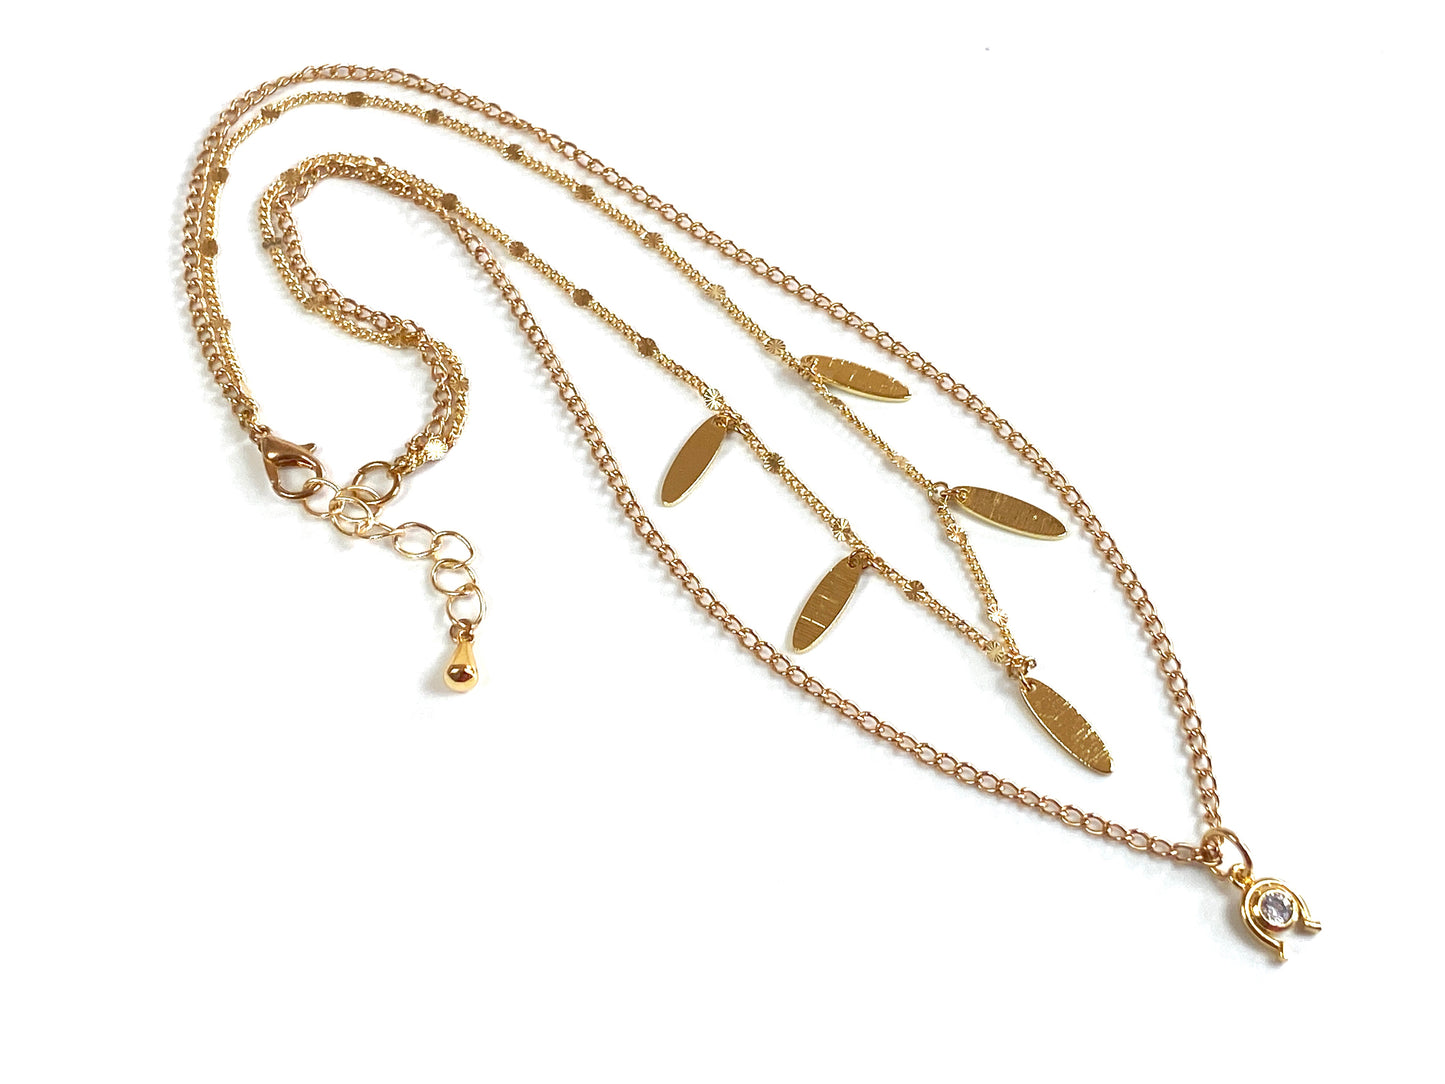 24 Kt gold plated layered necklace with CZ Horseshoe pendant